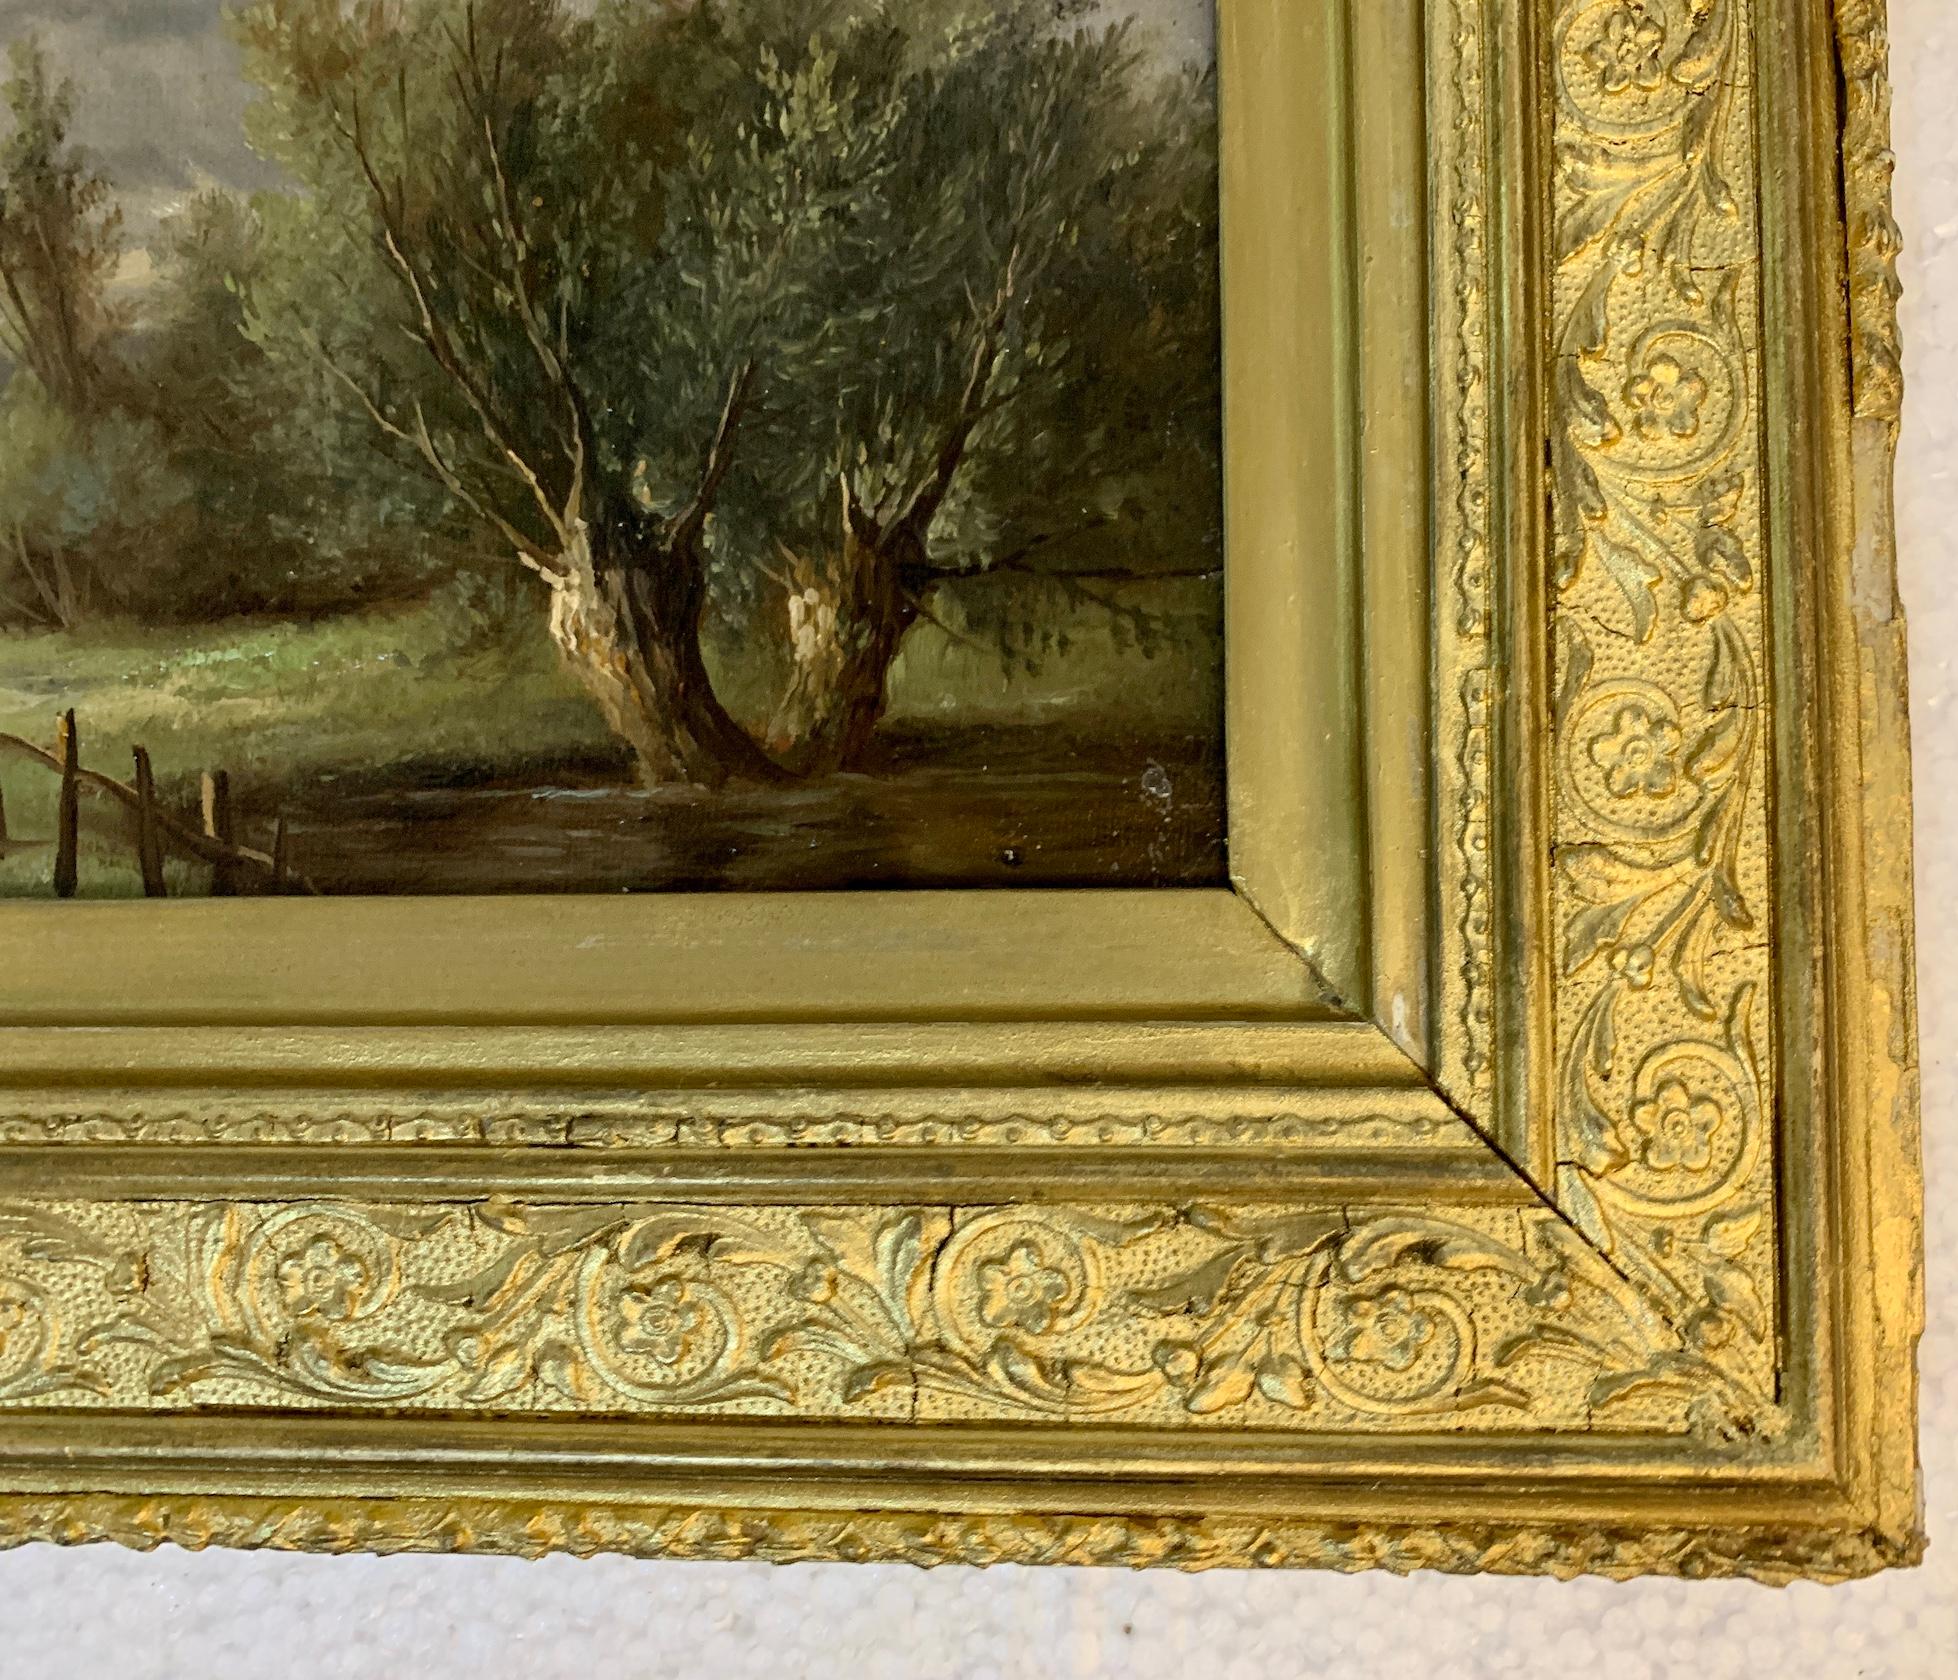 19th century English landscape with Oak and Yew trees on a pathway For Sale 4